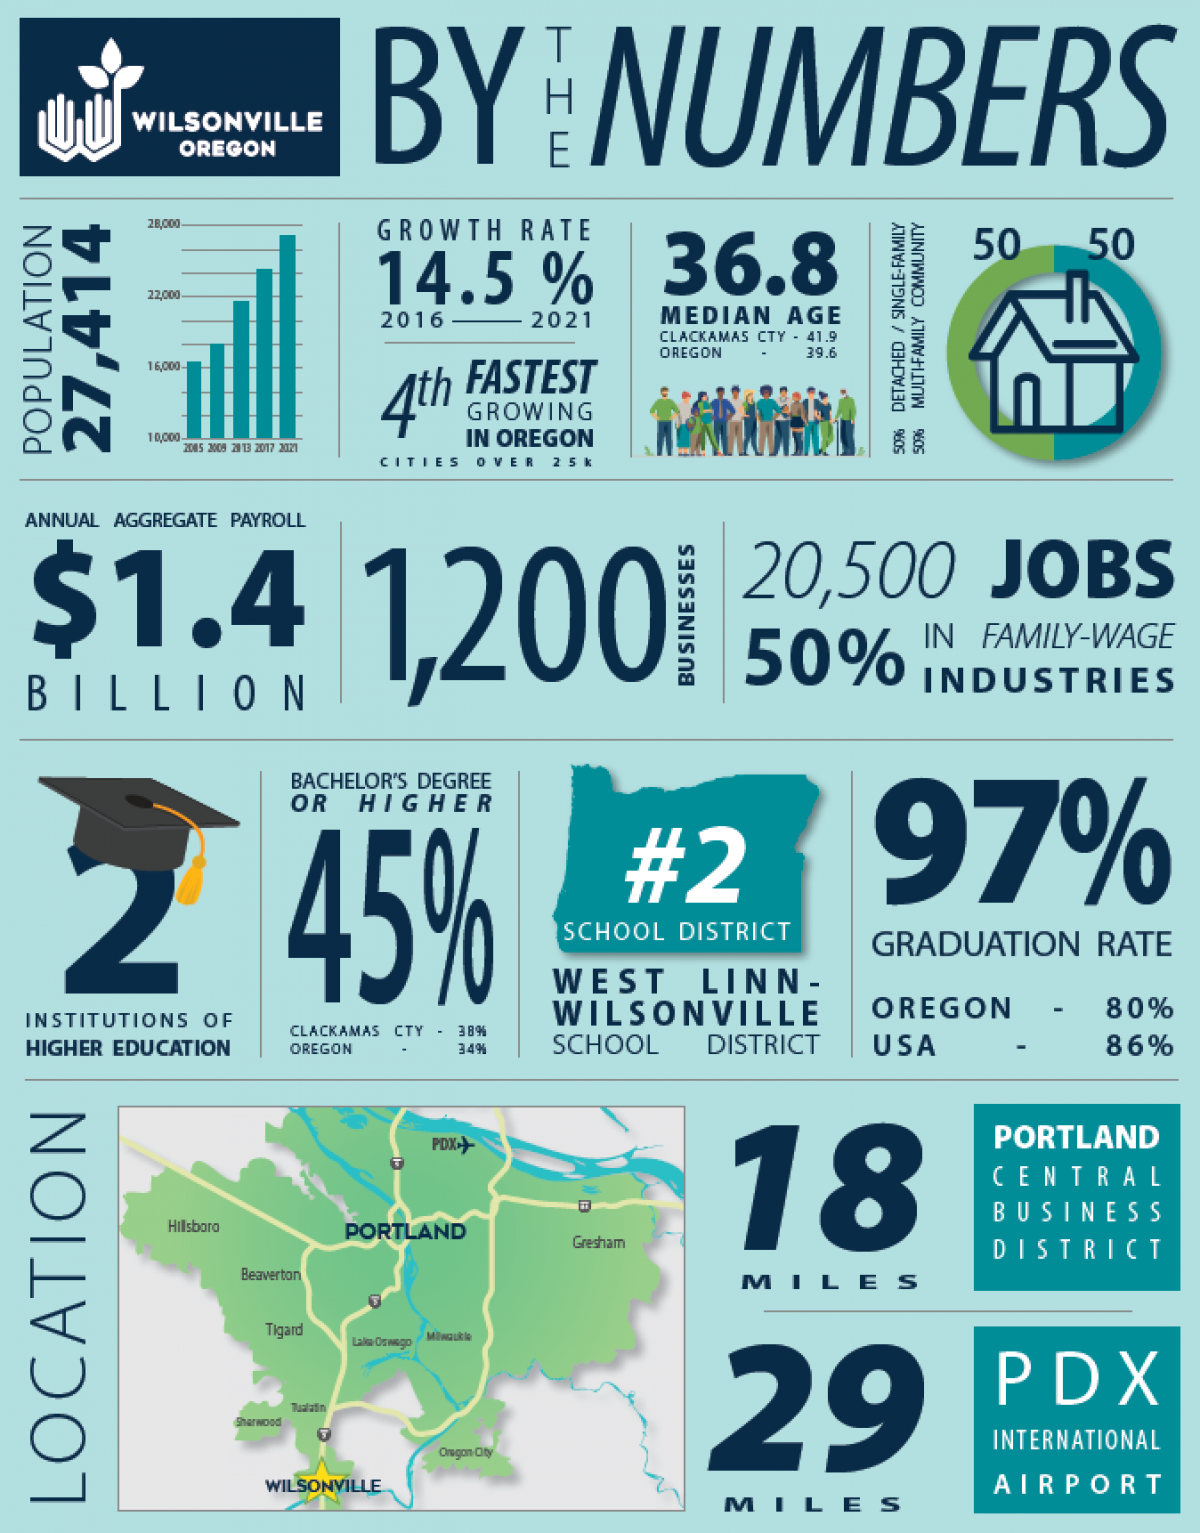 Wilsonville By the Numbers